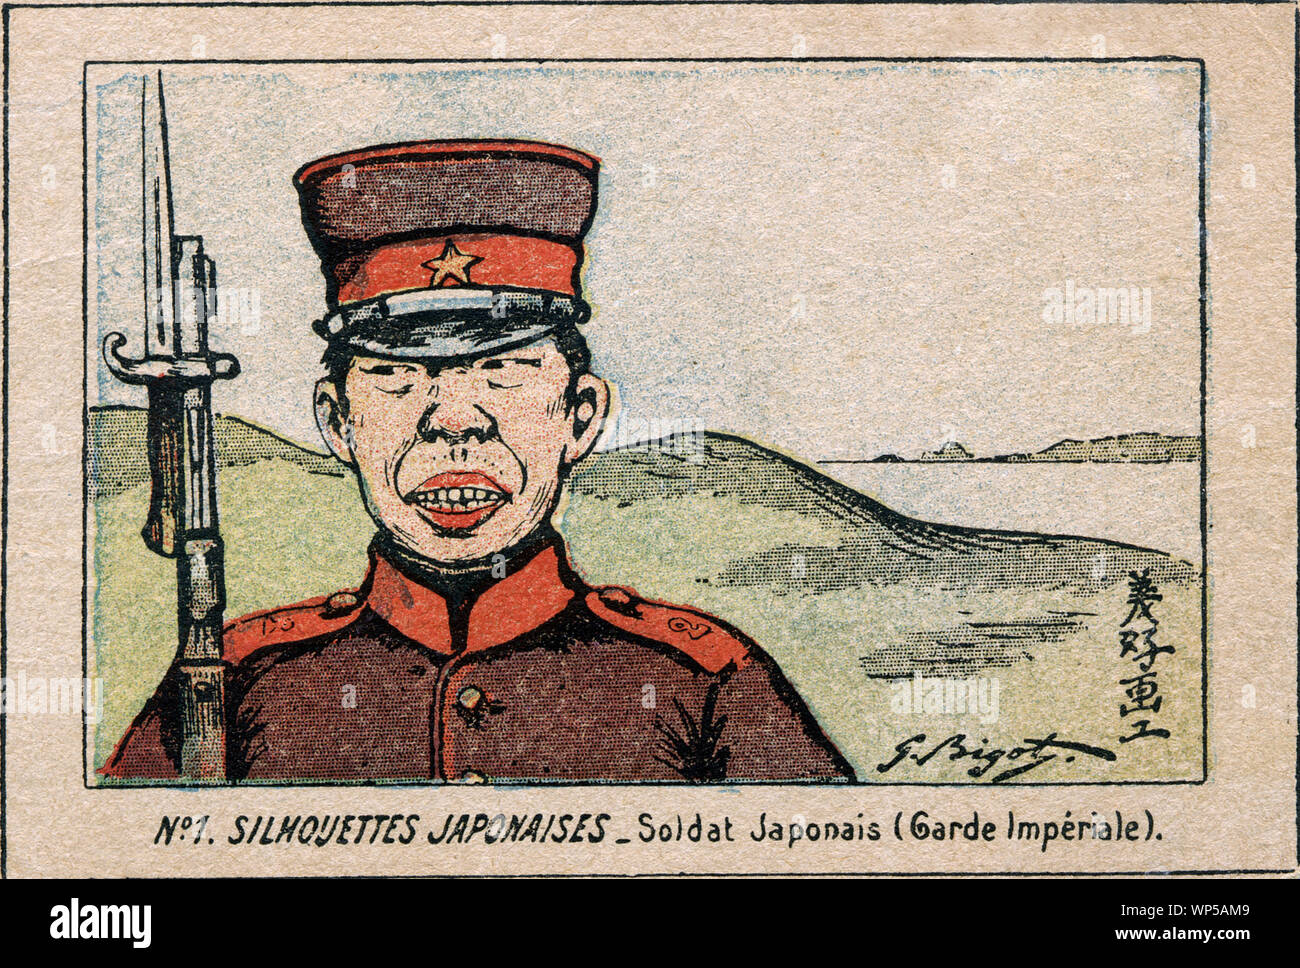 [ 1900s Japan - Japanese Soldier by French Artists George Bigot ] —   Japanese soldier. Illustration by French artist and caricaturist Georges Bigot  (1860 - 1927). The work is titled 'No.1 SILHOUETTES JAPONAISES - Soldat Japonais (Garde Imperiale).'  20th century vintage postcard. Stock Photo